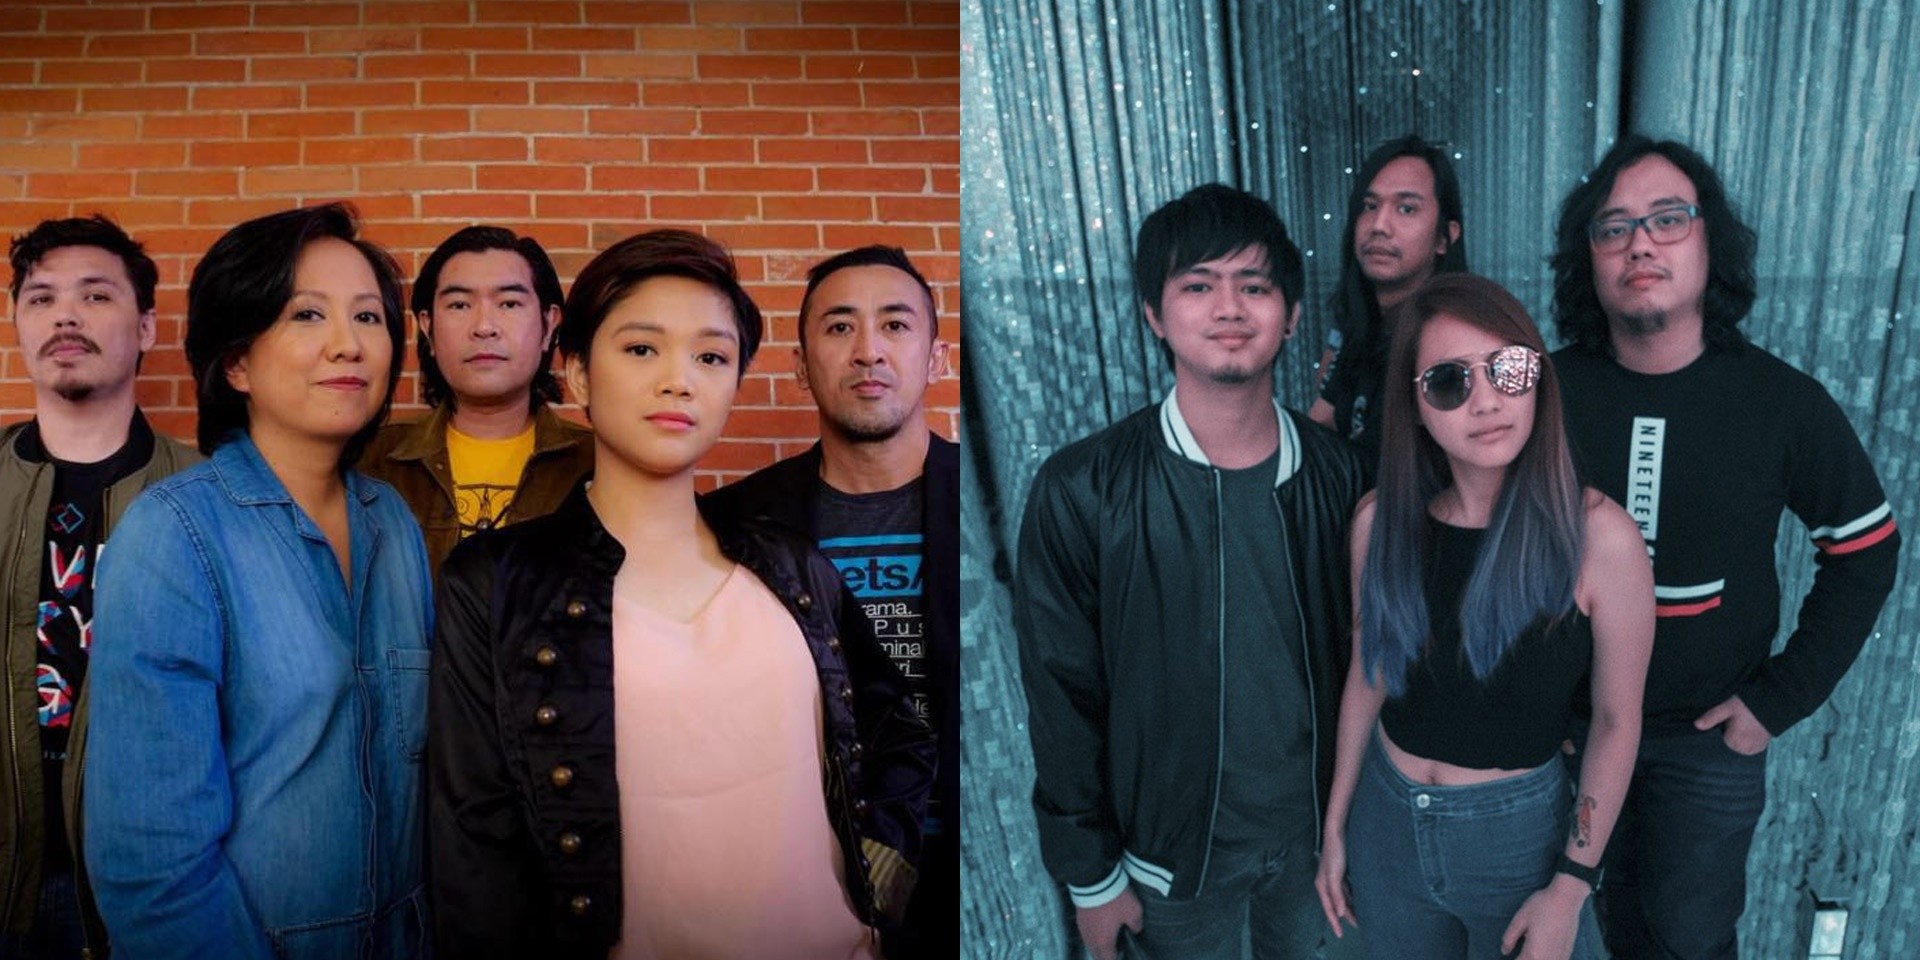 Imago, Gracenote, and more to perform at benefit concert VICTUS: Rock for Cure